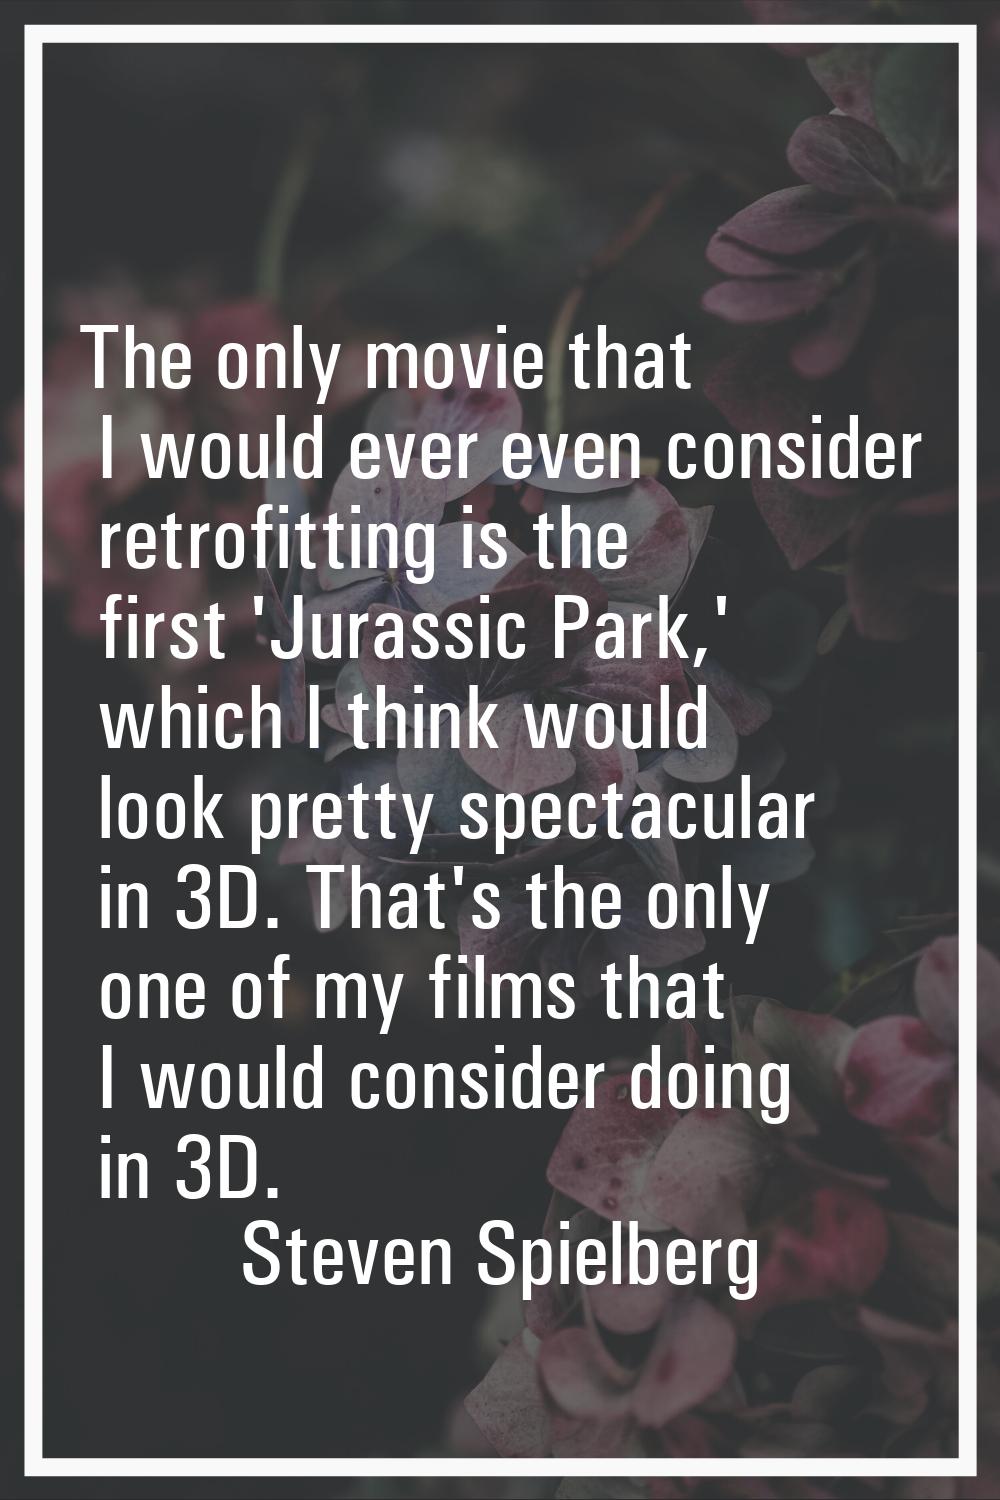 The only movie that I would ever even consider retrofitting is the first 'Jurassic Park,' which I t